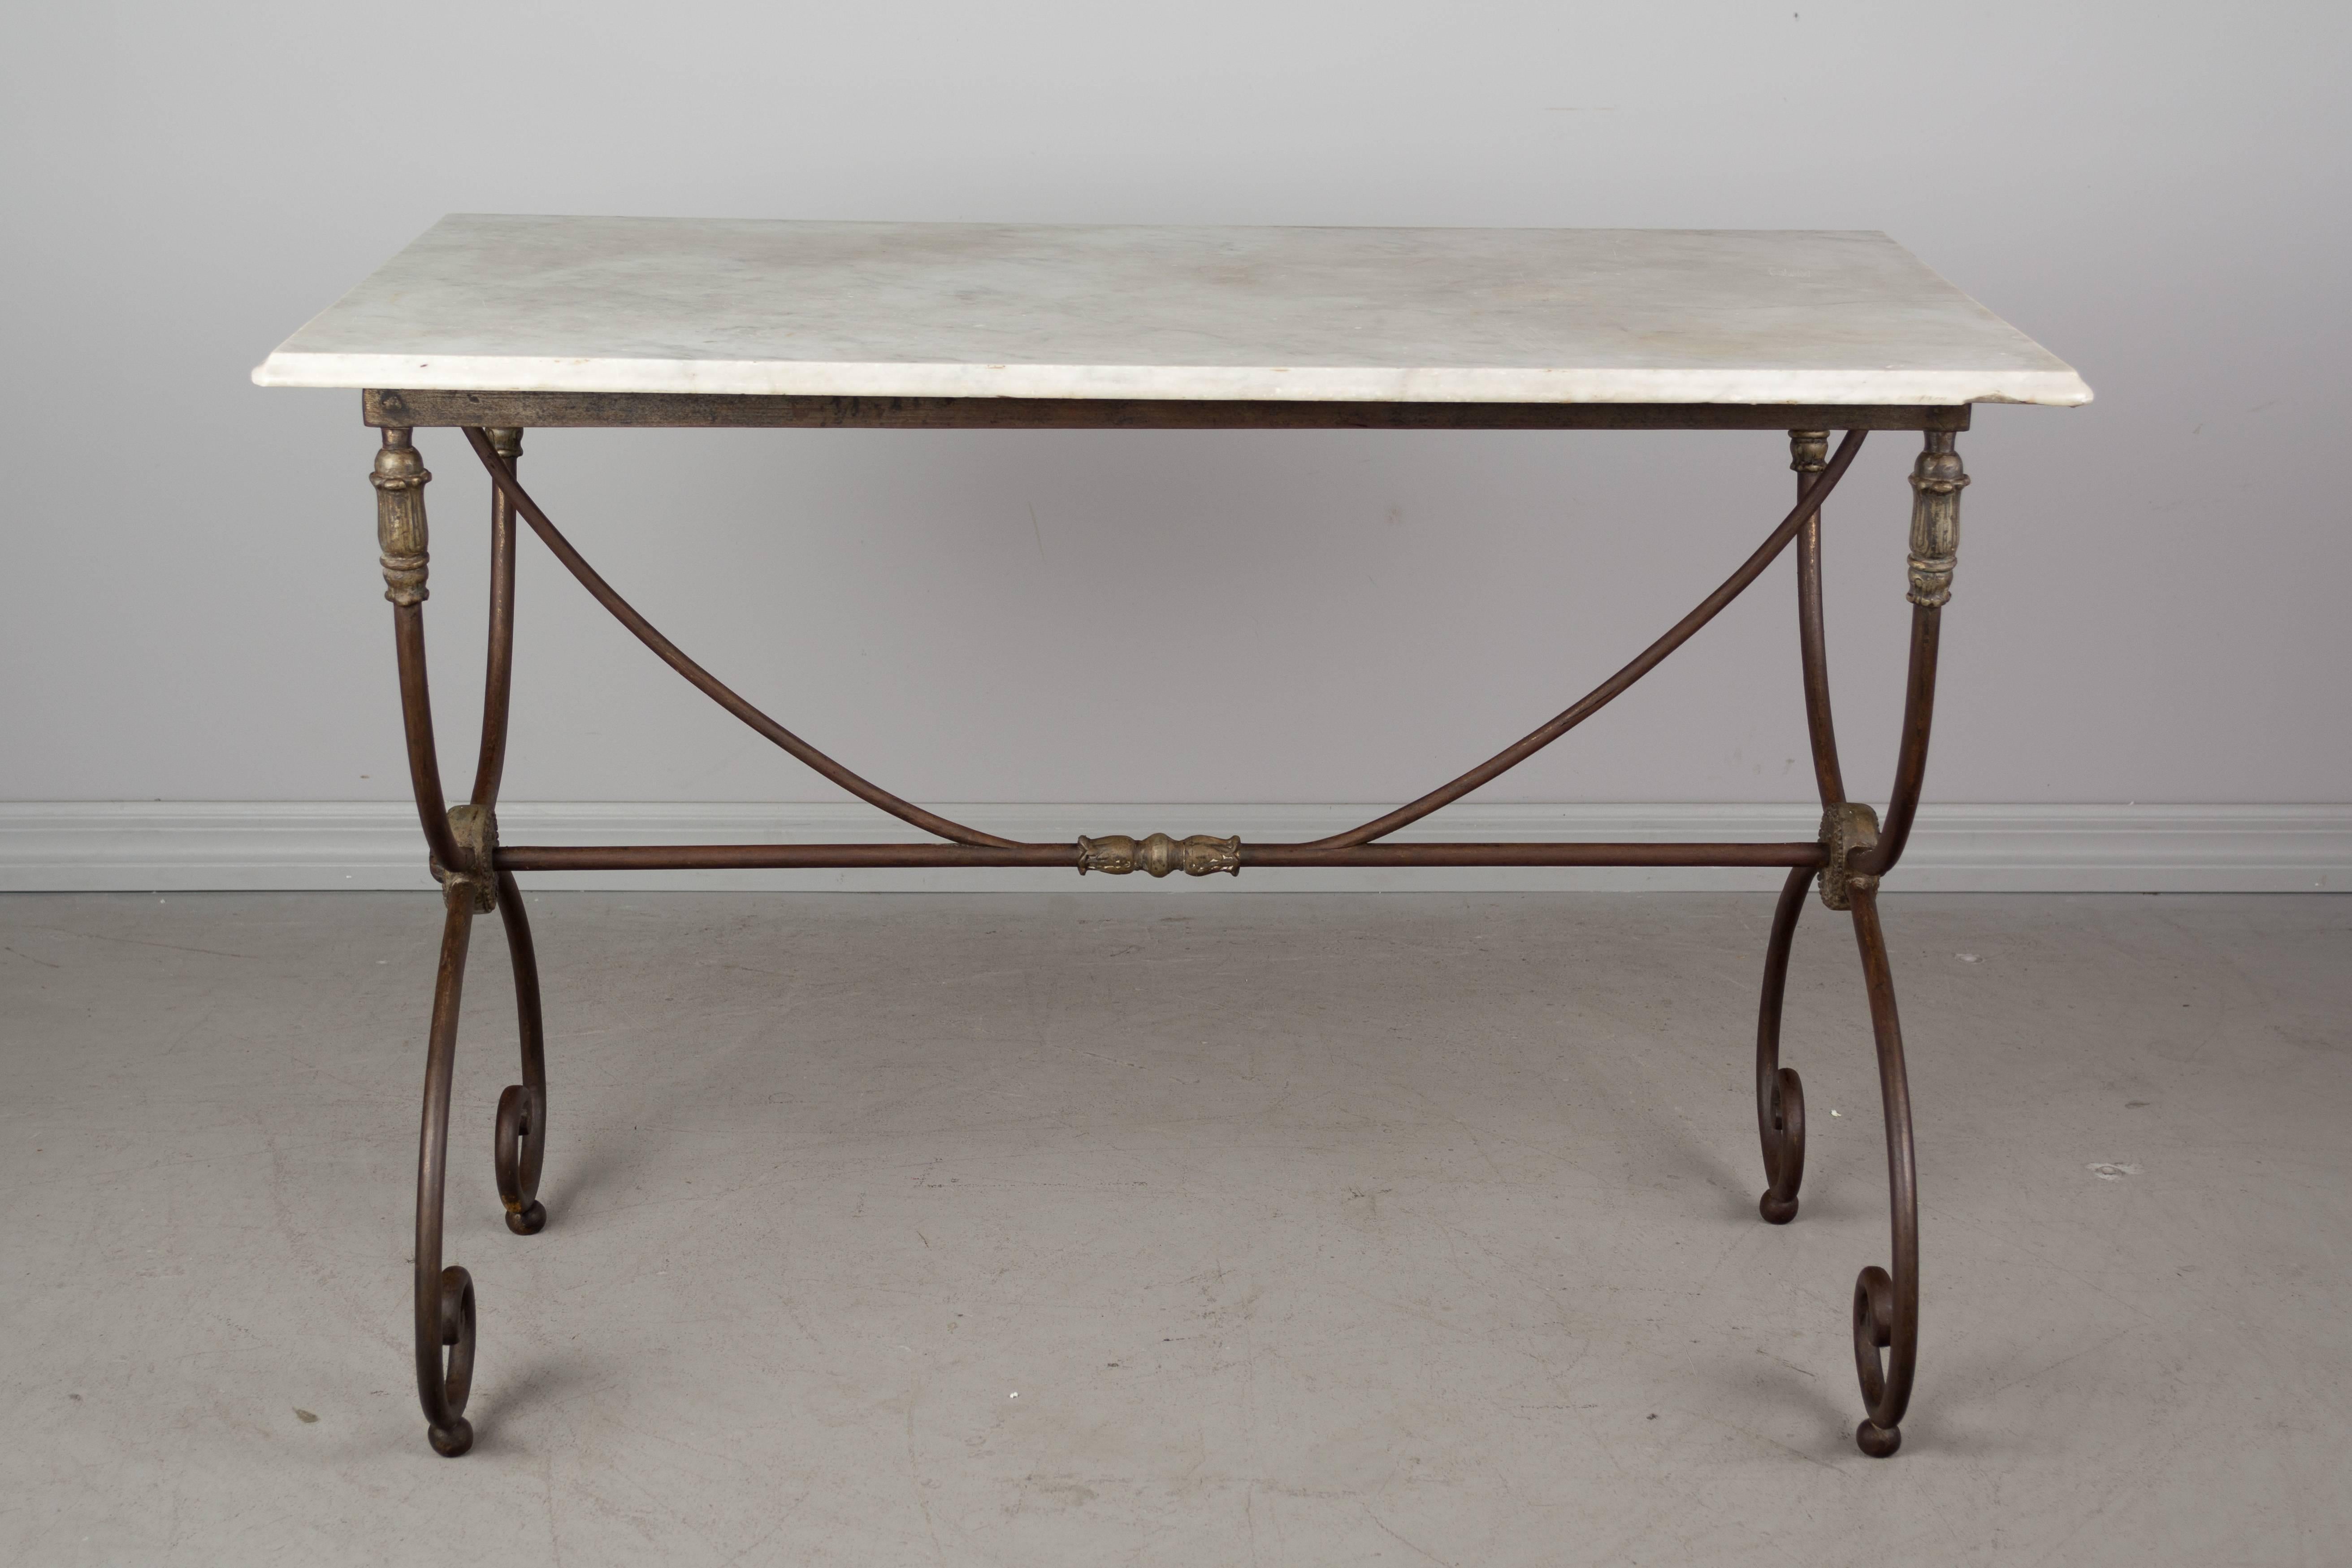 20th Century French Wrought Iron Marble-Top Table